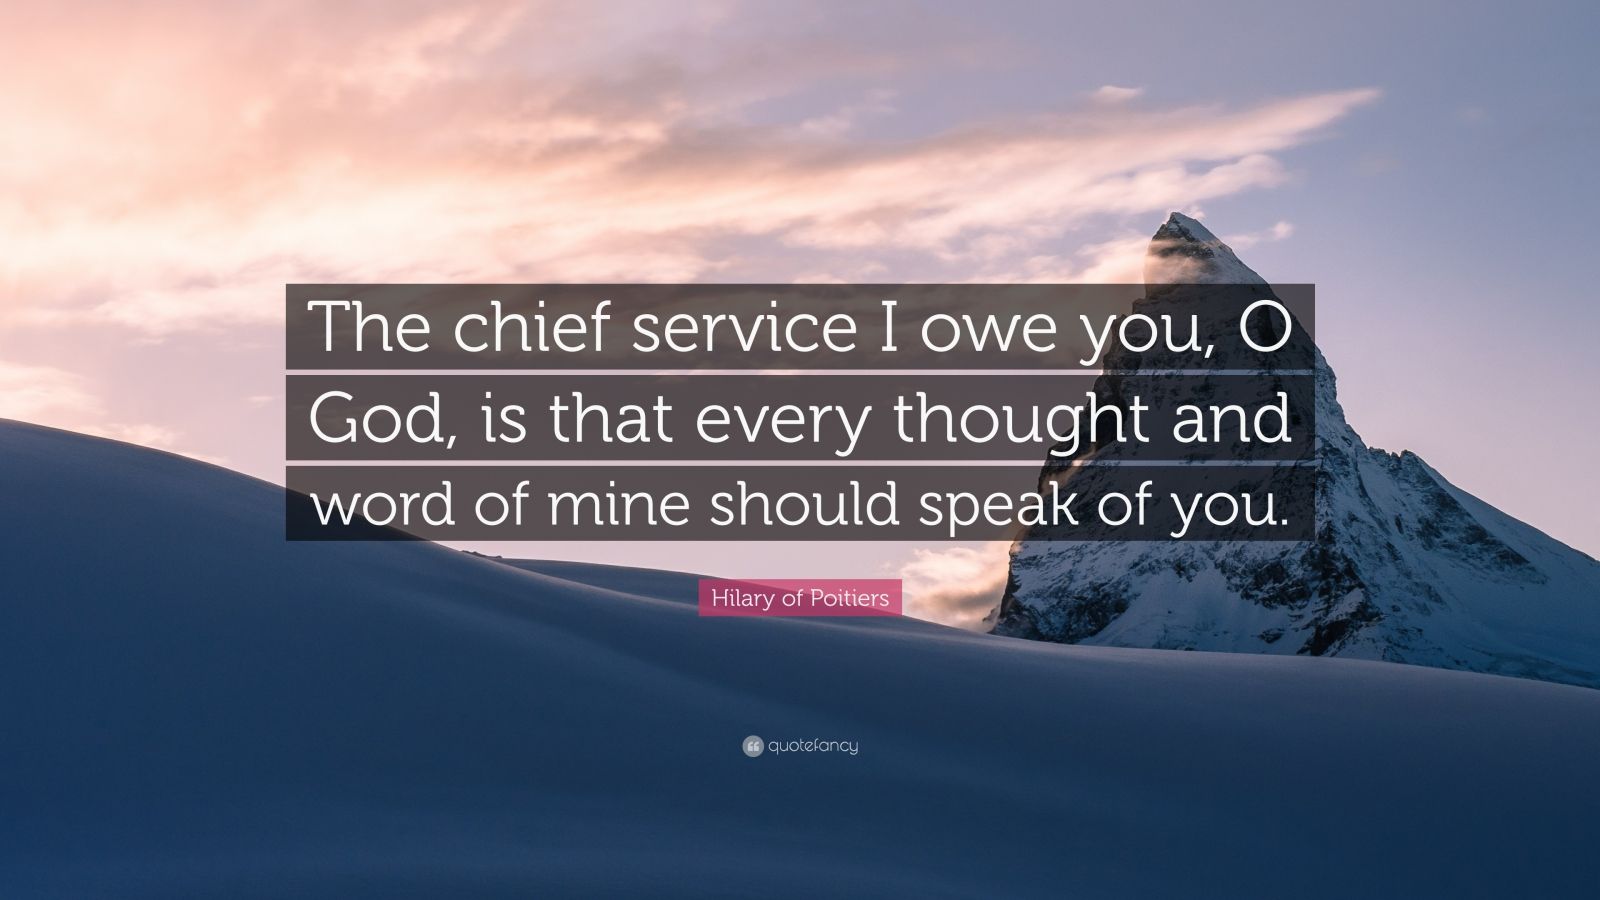 Hilary of Poitiers Quote “The chief service I owe you, O God, is that